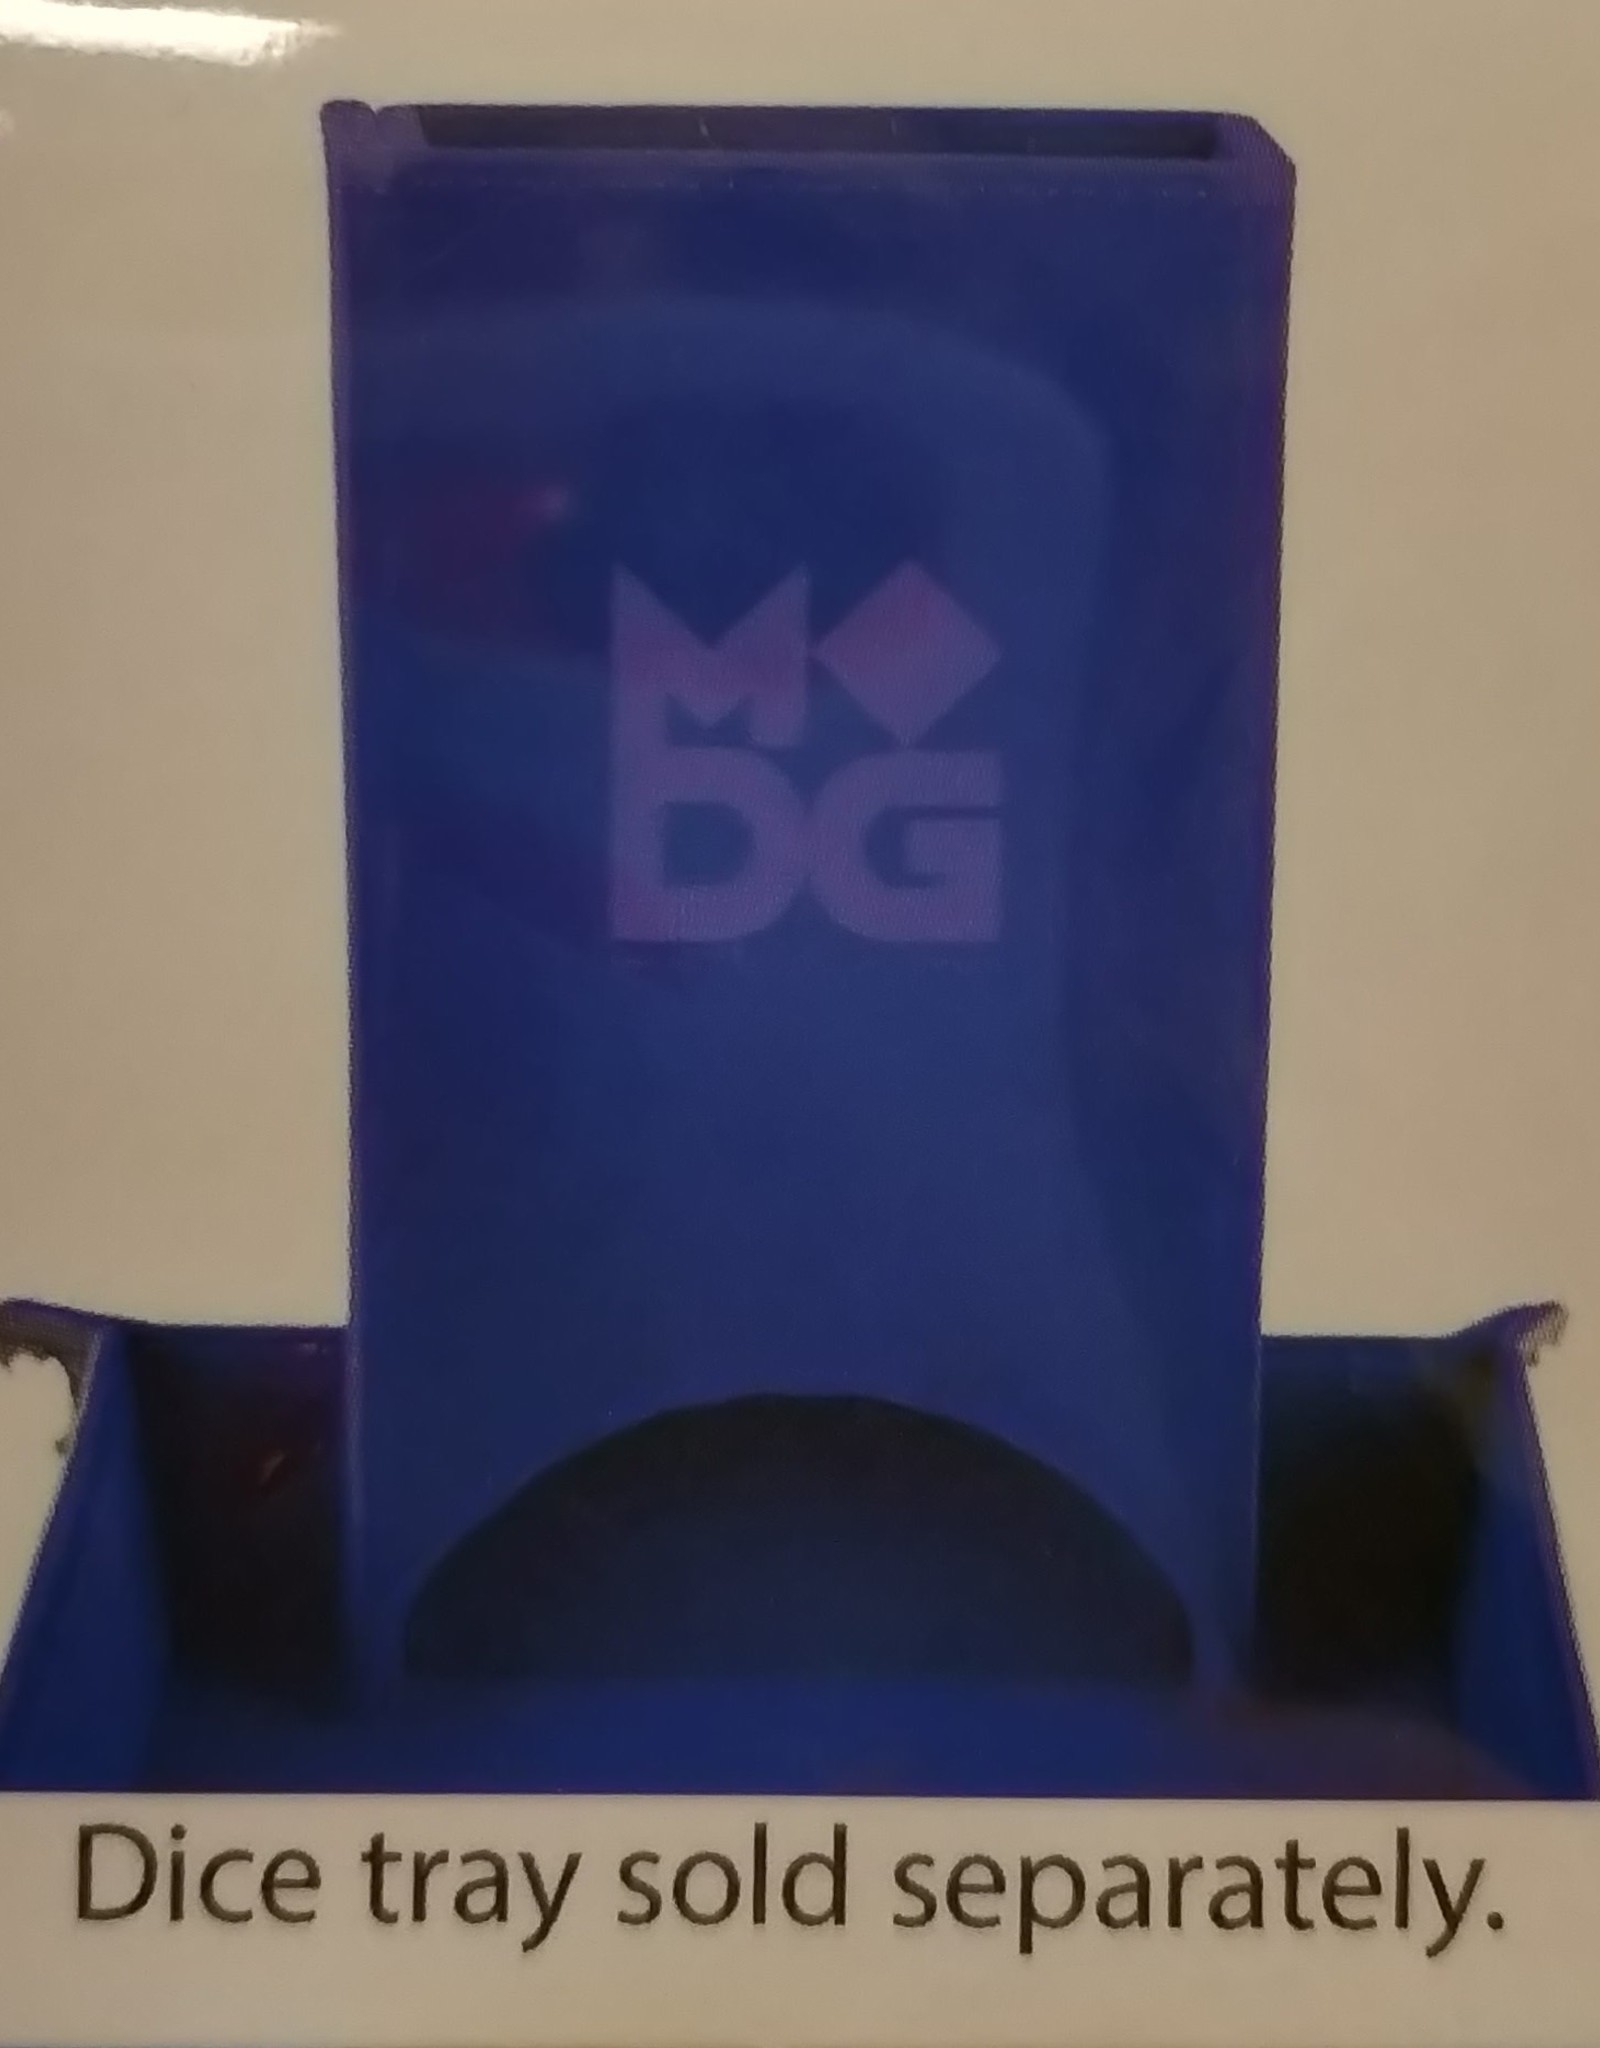 MDG Dice Tower: blue